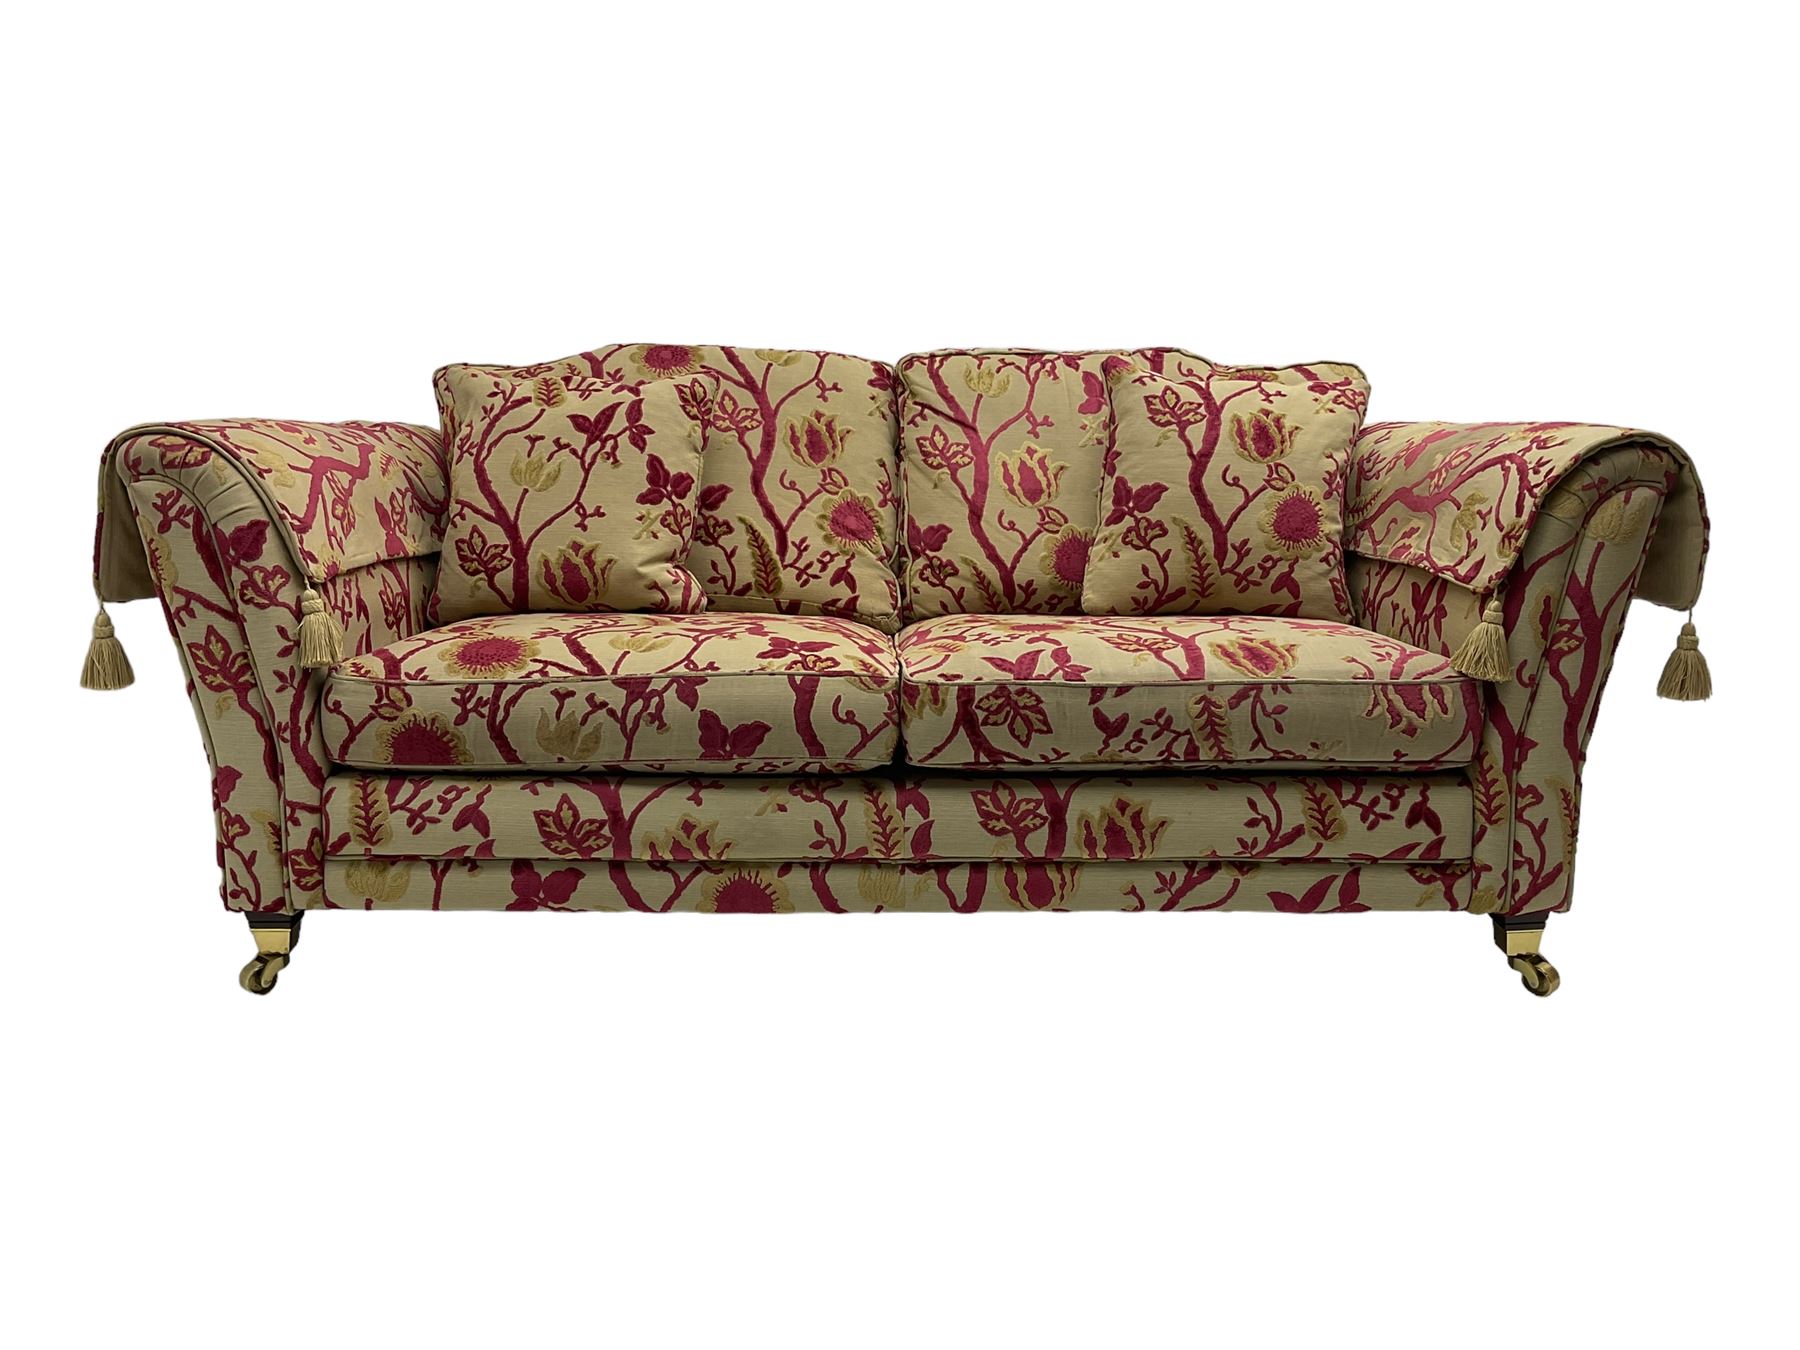 Three-piece lounge suite - large two-seat sofa upholstered in red and gold striped fabric (W185cm - Image 2 of 24